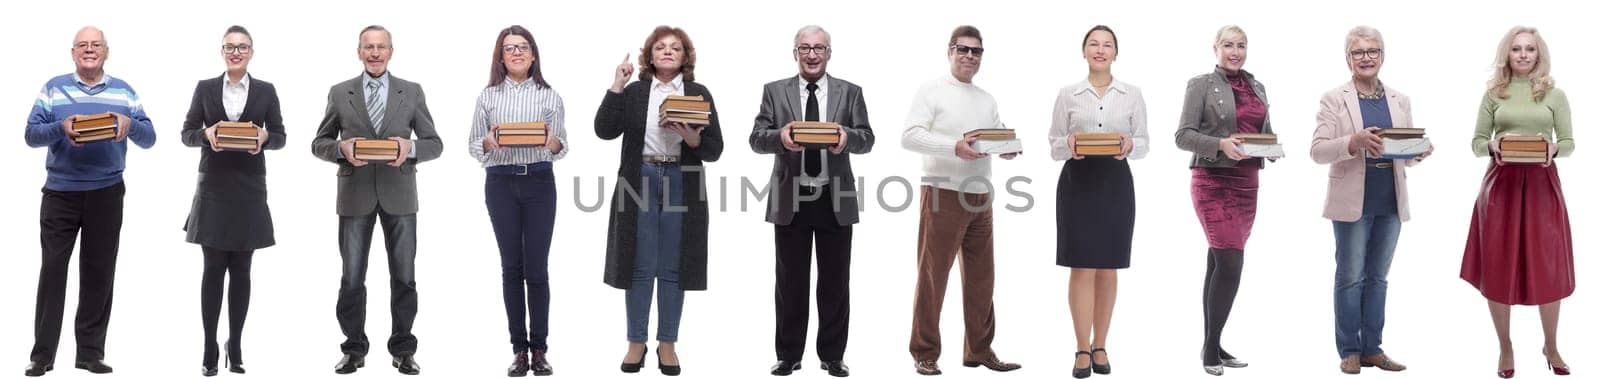 group of people holding books in hands isolated on white background